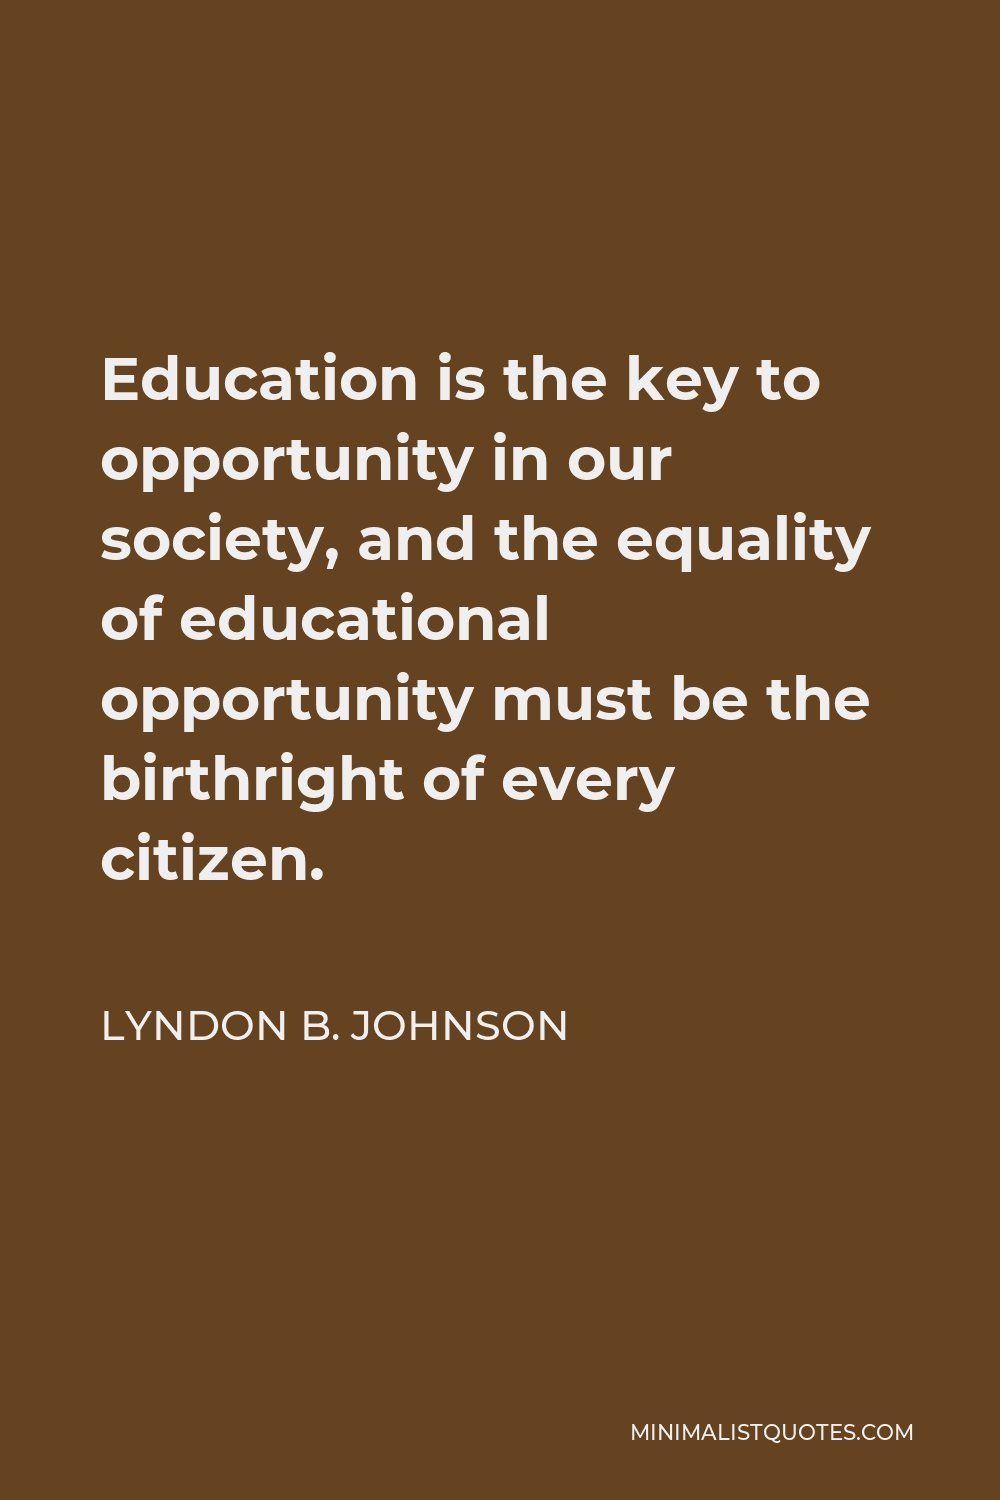 Lyndon B. Johnson Quote - Education is the key to opportunity in our society, and the equality of educational opportunity must be the birthright of every citizen.